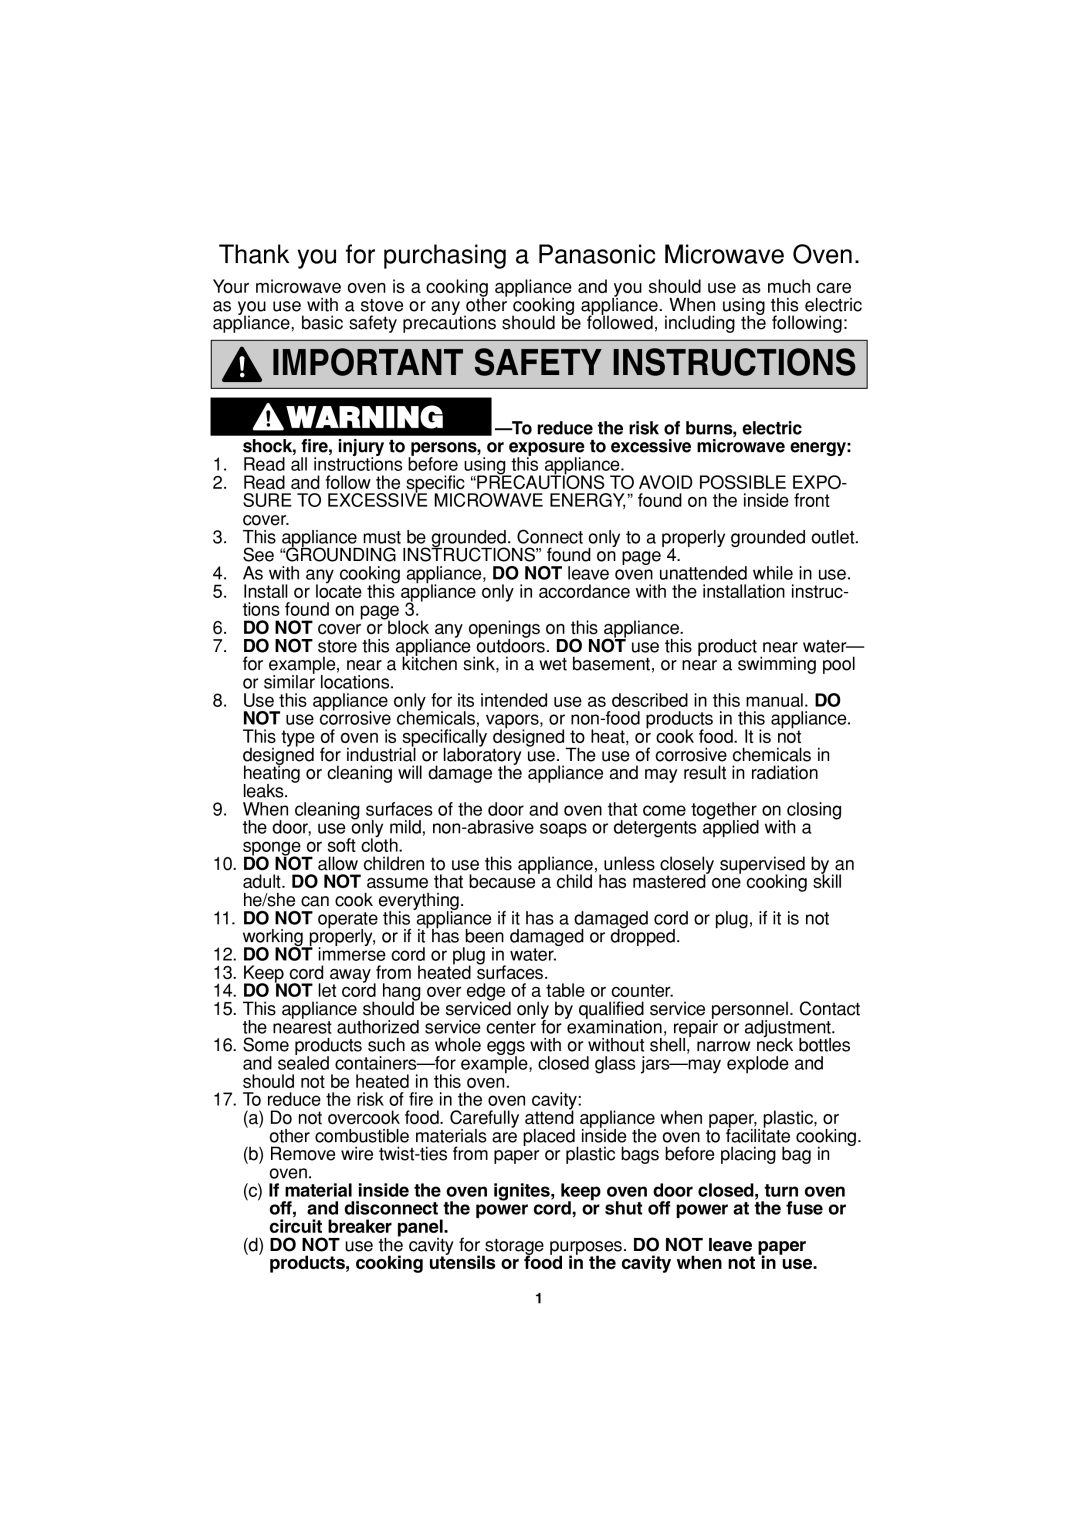 Panasonic NN-S443 Important Safety Instructions, Thank you for purchasing a Panasonic Microwave Oven 